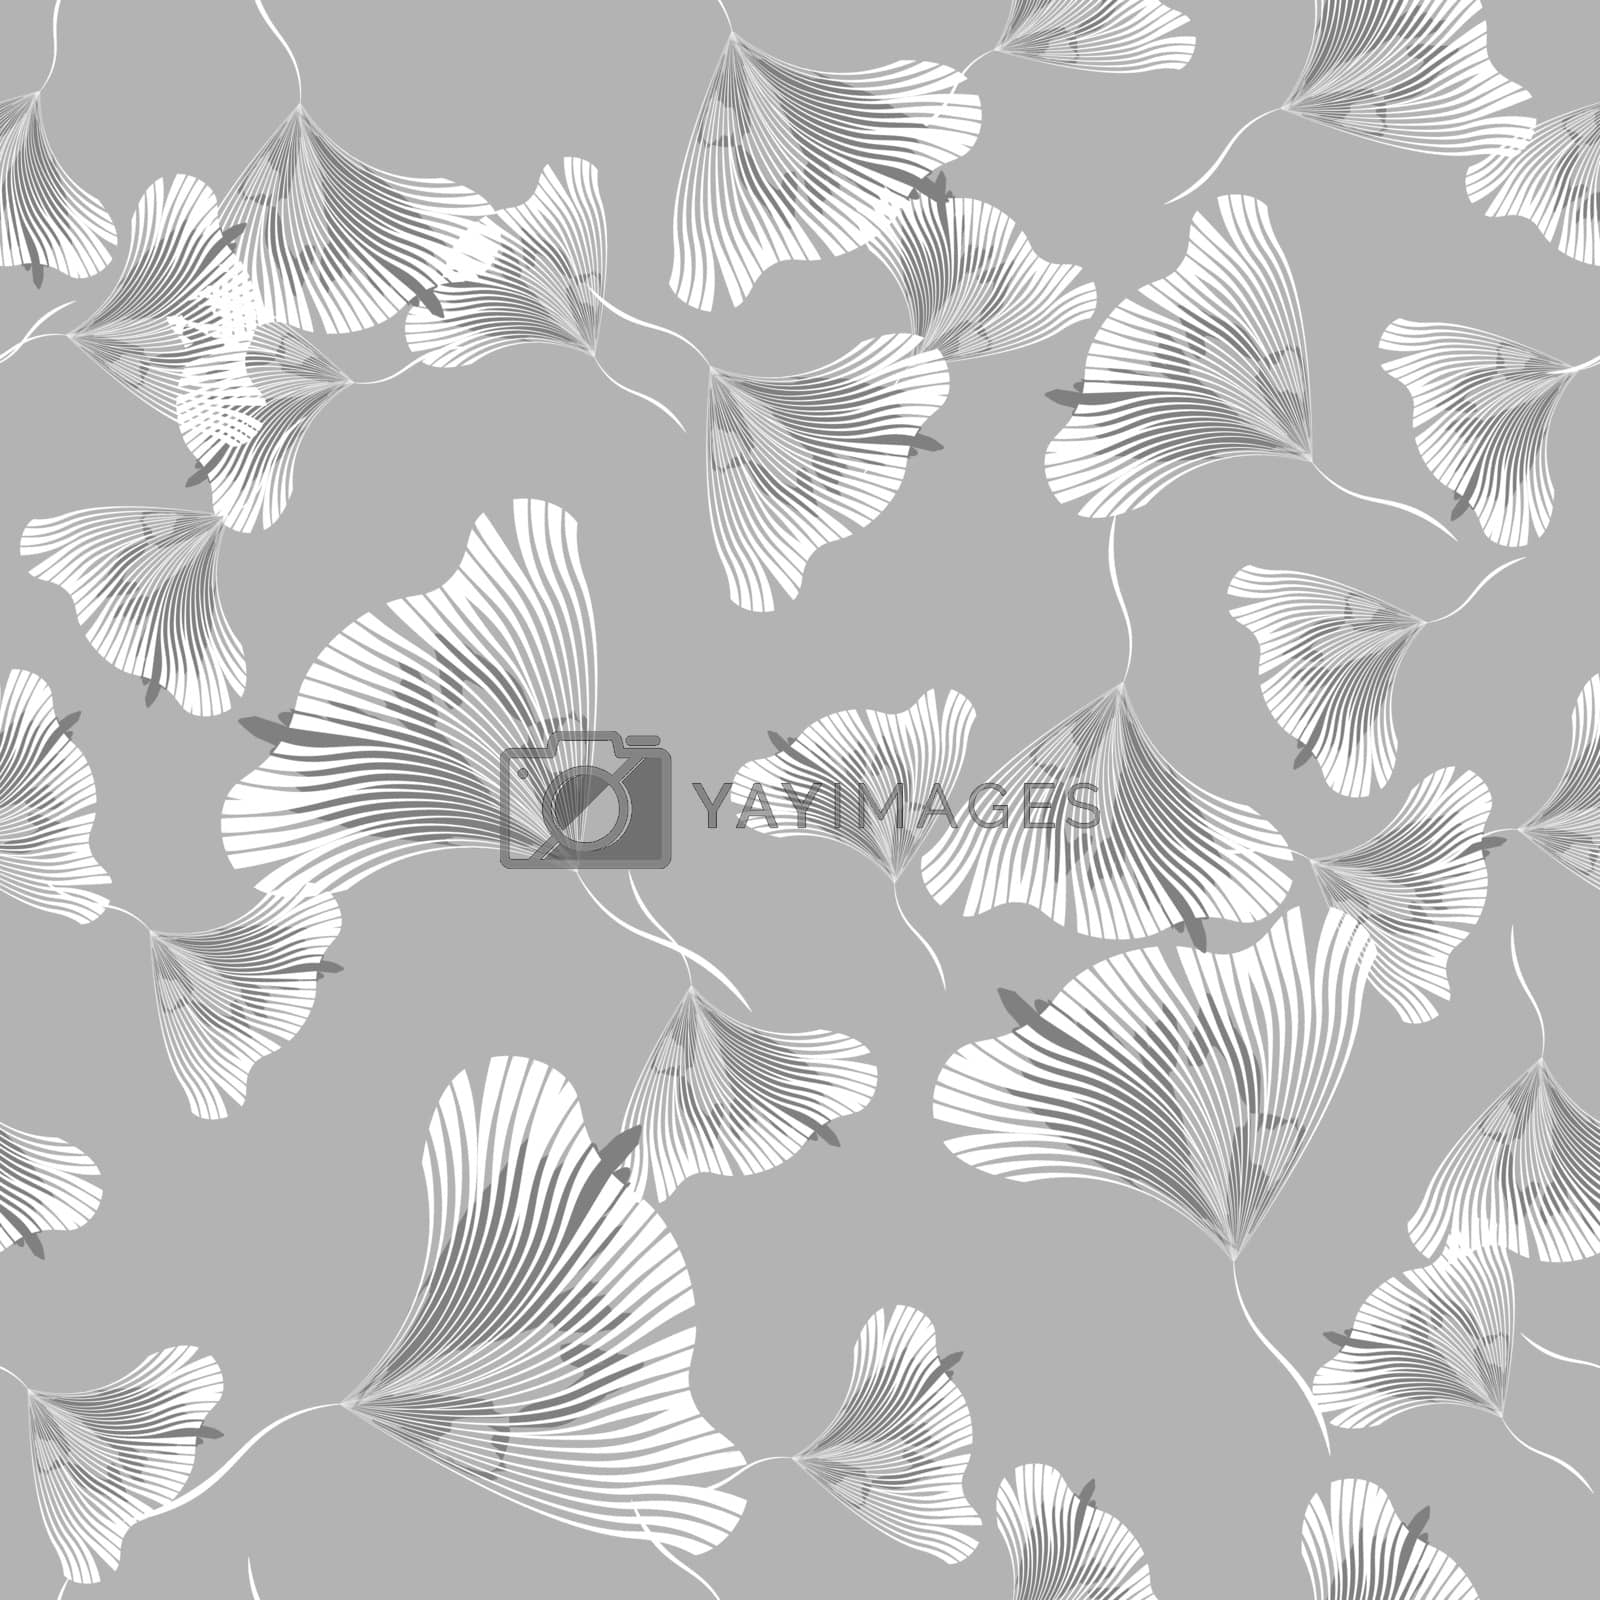 Royalty free image of Vector Seamless Contour Floral Pattern. Monochrome Floral Texture, Decorative Leaves by Musjaka